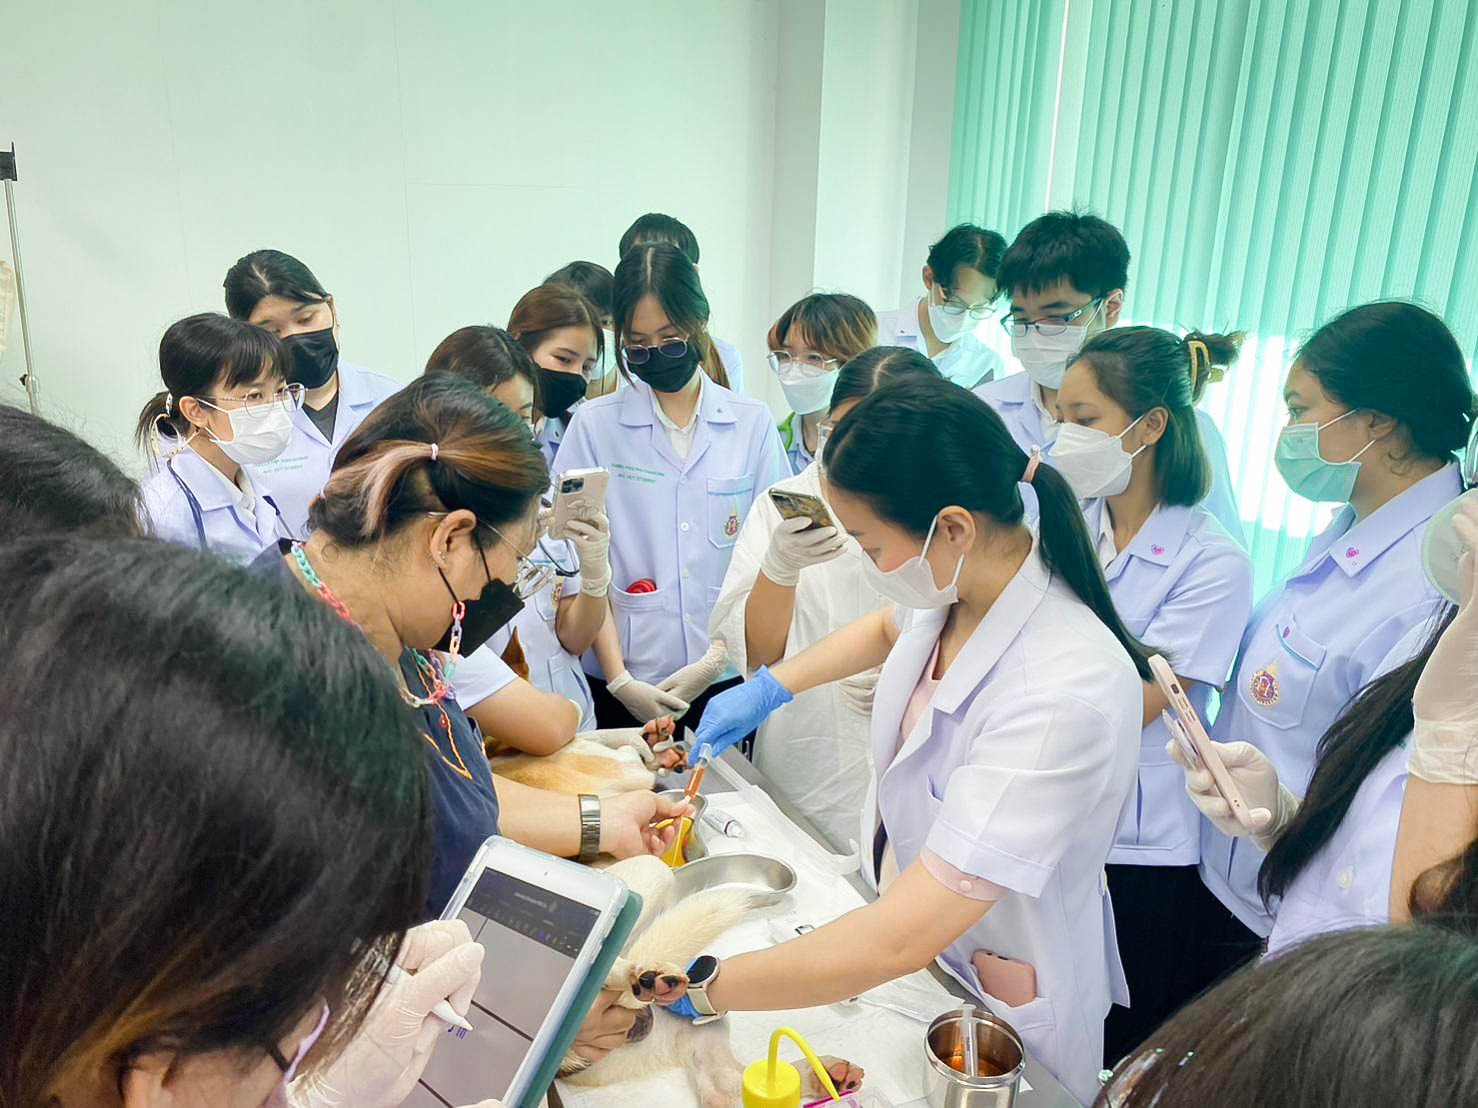 The veterinary students learn sample collection and urine testing in small animals.